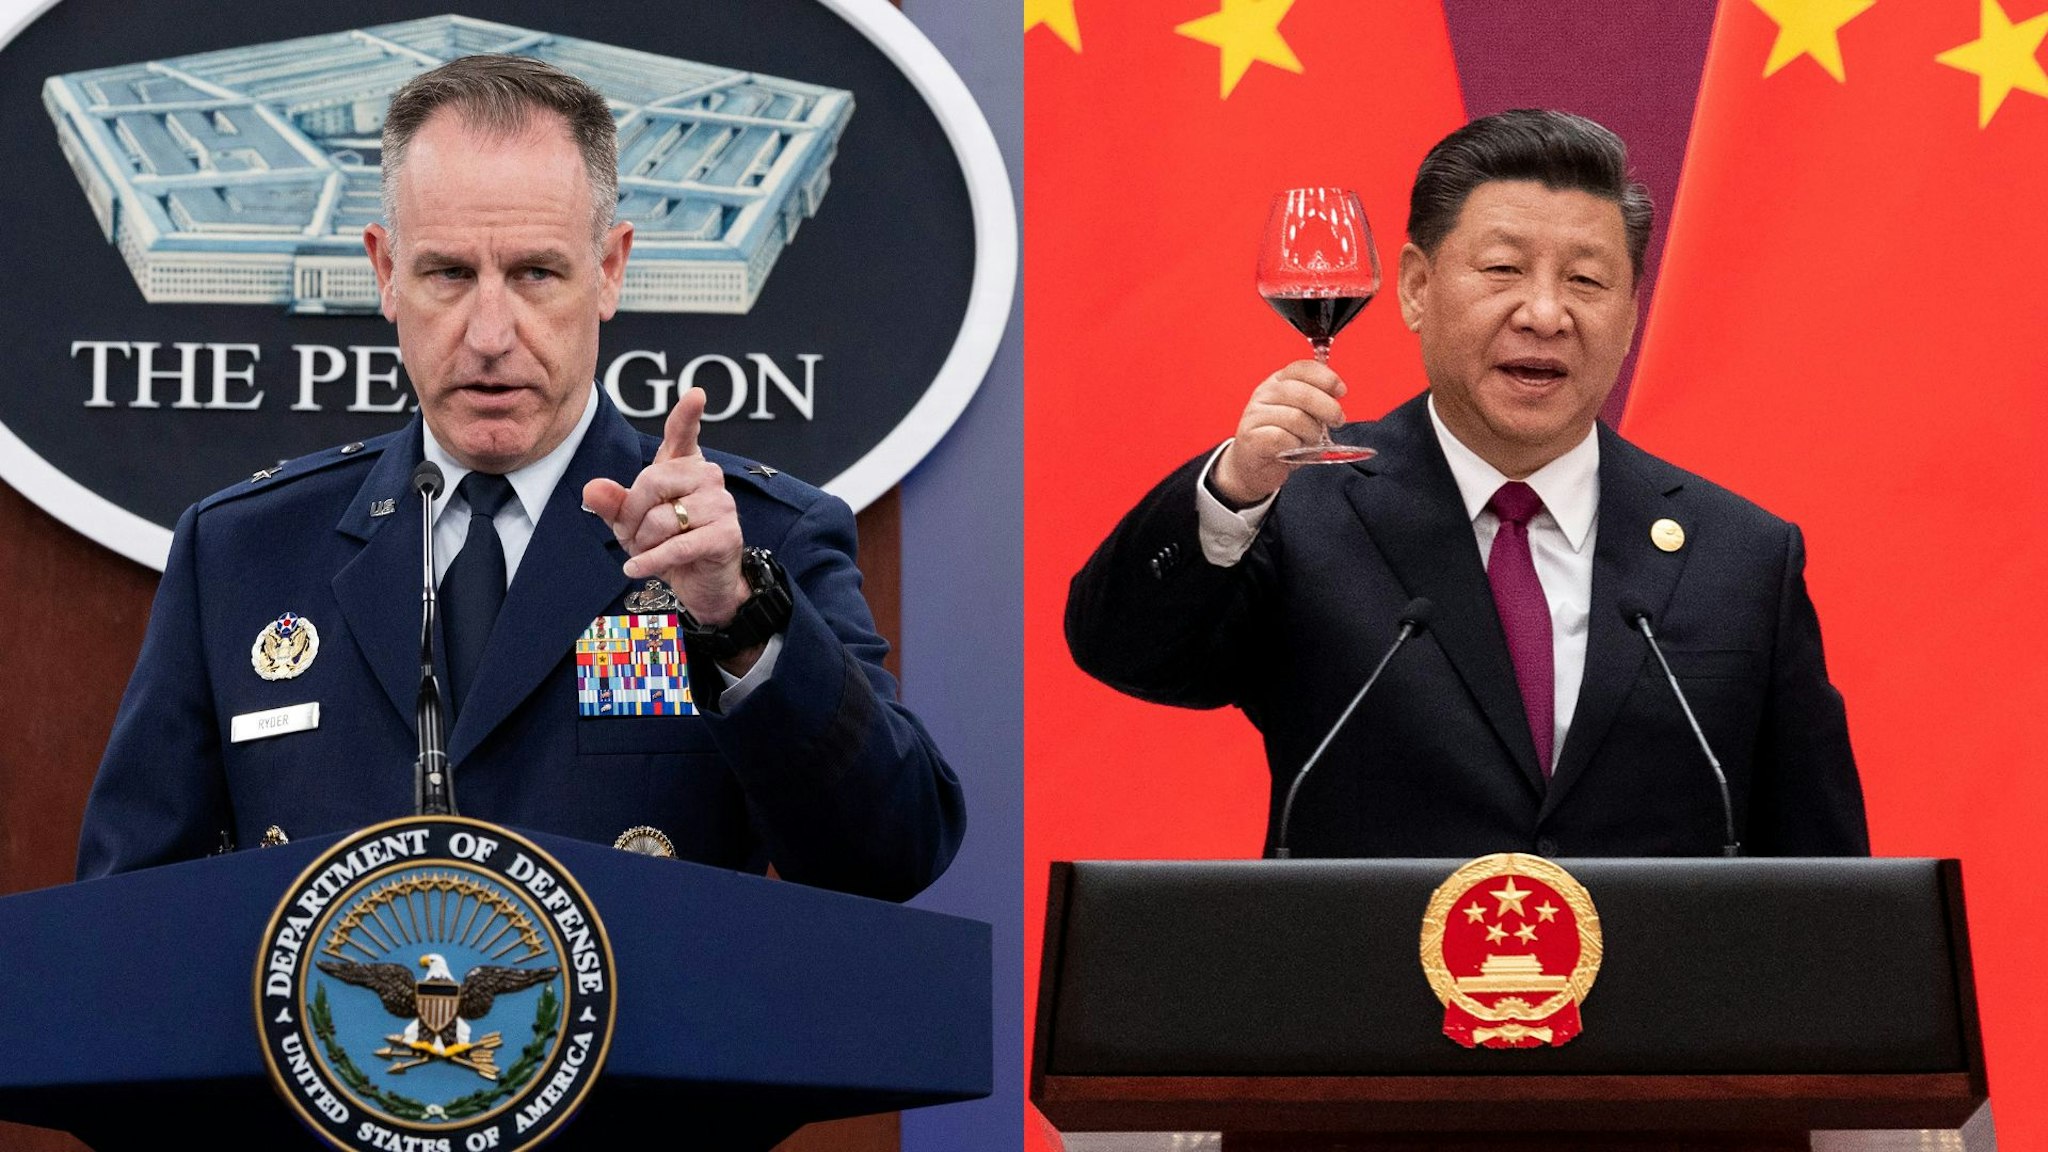 BEIJING, CHINA - APRIL 26: Chinese President Xi Jinping proposes a toast during the welcome banquet for leaders attending the Belt and Road Forum at the Great Hall of the People on April 26, 2019 in Beijing, China. ARLINGTON, VIRGINIA - OCTOBER 18: Pentagon Press Secretary Brig. Gen. Pat Ryder holds a press briefing at the Pentagon on October 18, 2022 in Arlington, Virginia. Ryder spoke on America's ongoing support for Ukraine and resistance to Russian President Vladimir Putin, as well as the Defense Department's relationship with SpaceX.